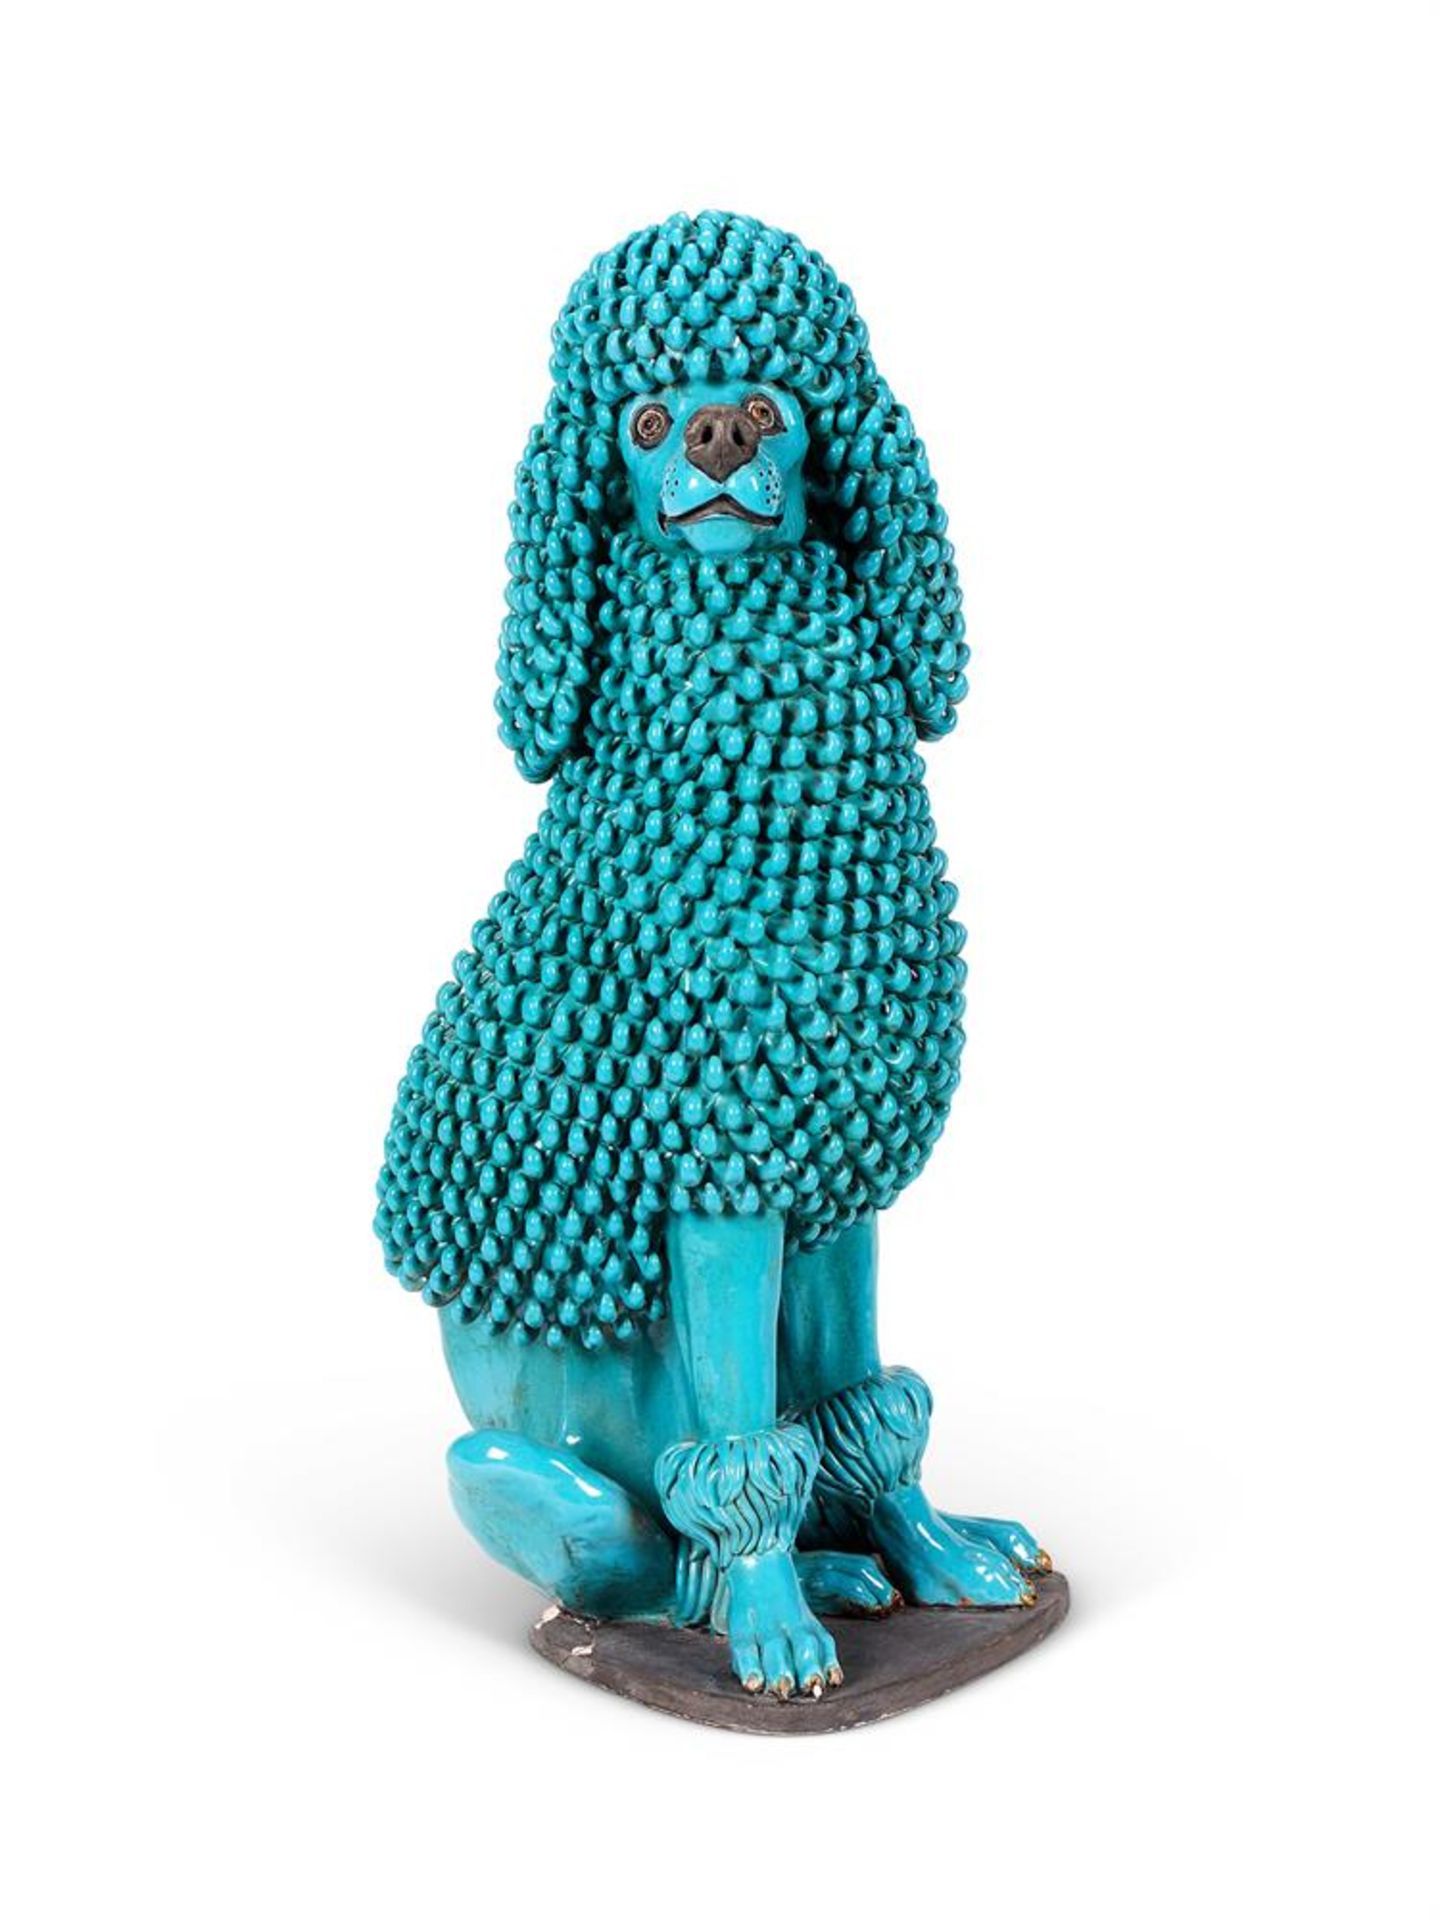 A LIFE-SIZED BLUE GLAZED RED POTTERY POODLE, ITALIAN